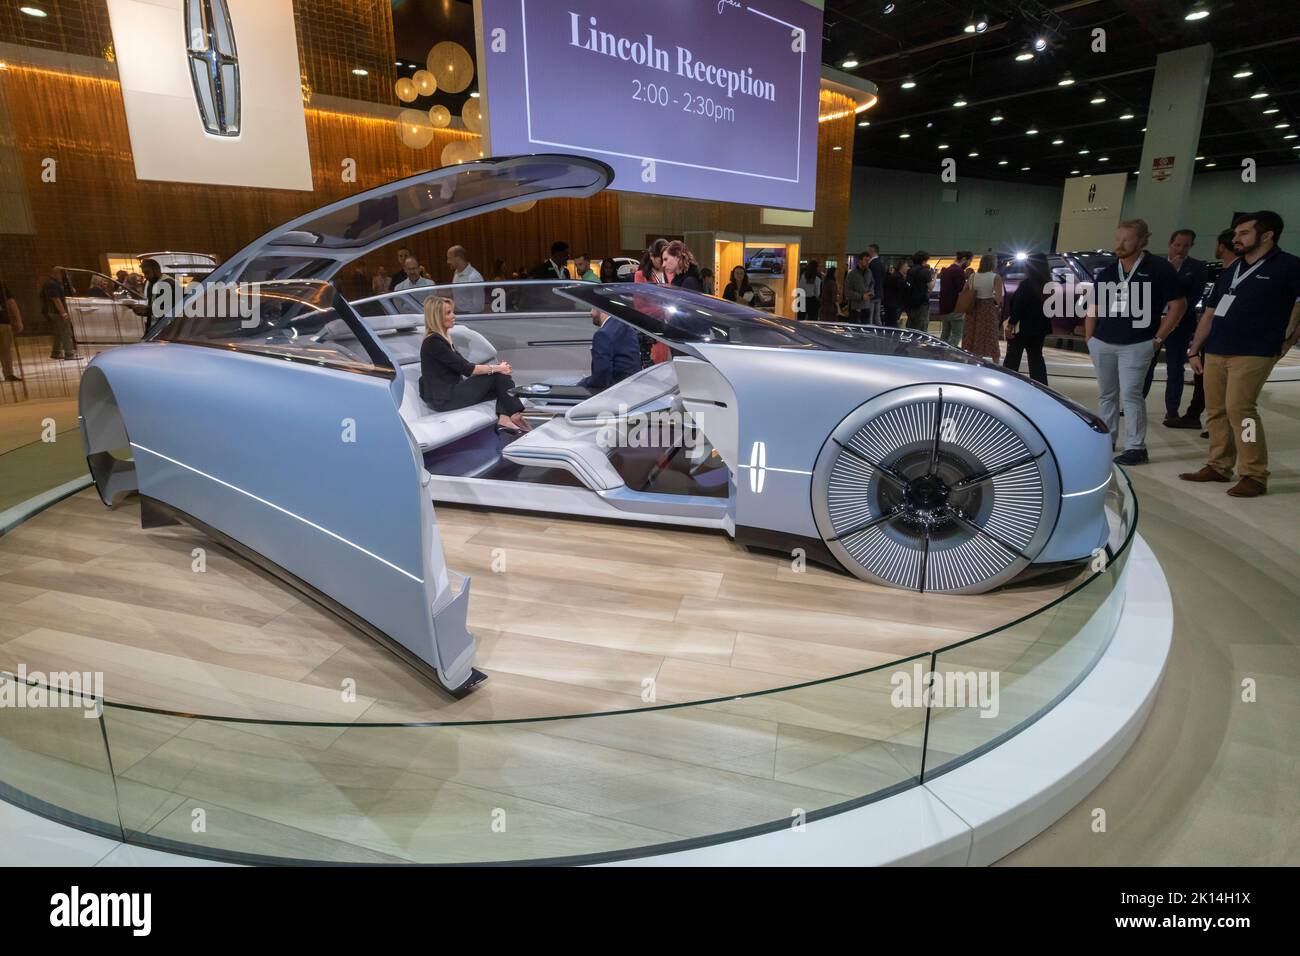 Detroit, Michigan, USA. 14th Sep, 2022. A journalist conducts an interview in the passenger compartment of the Lincoln L100 concept car at the North American International Auto Show. Credit: Jim West/Alamy Live News Stock Photo